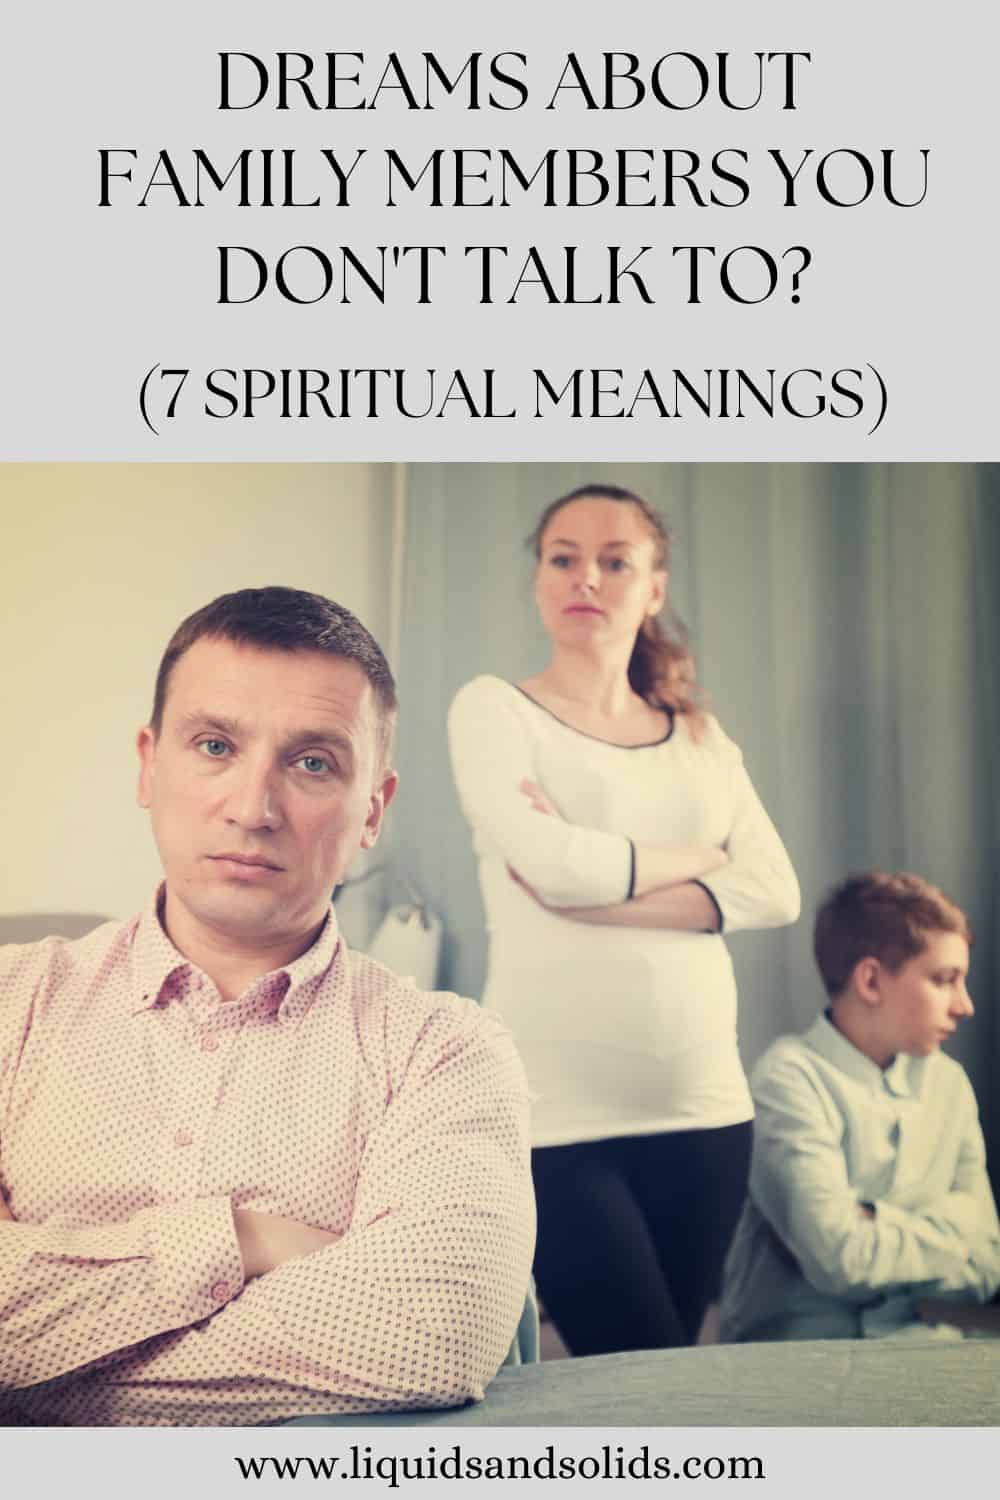 Dreams About Family Members You Don't Talk To? (7 Spiritual Meanings)